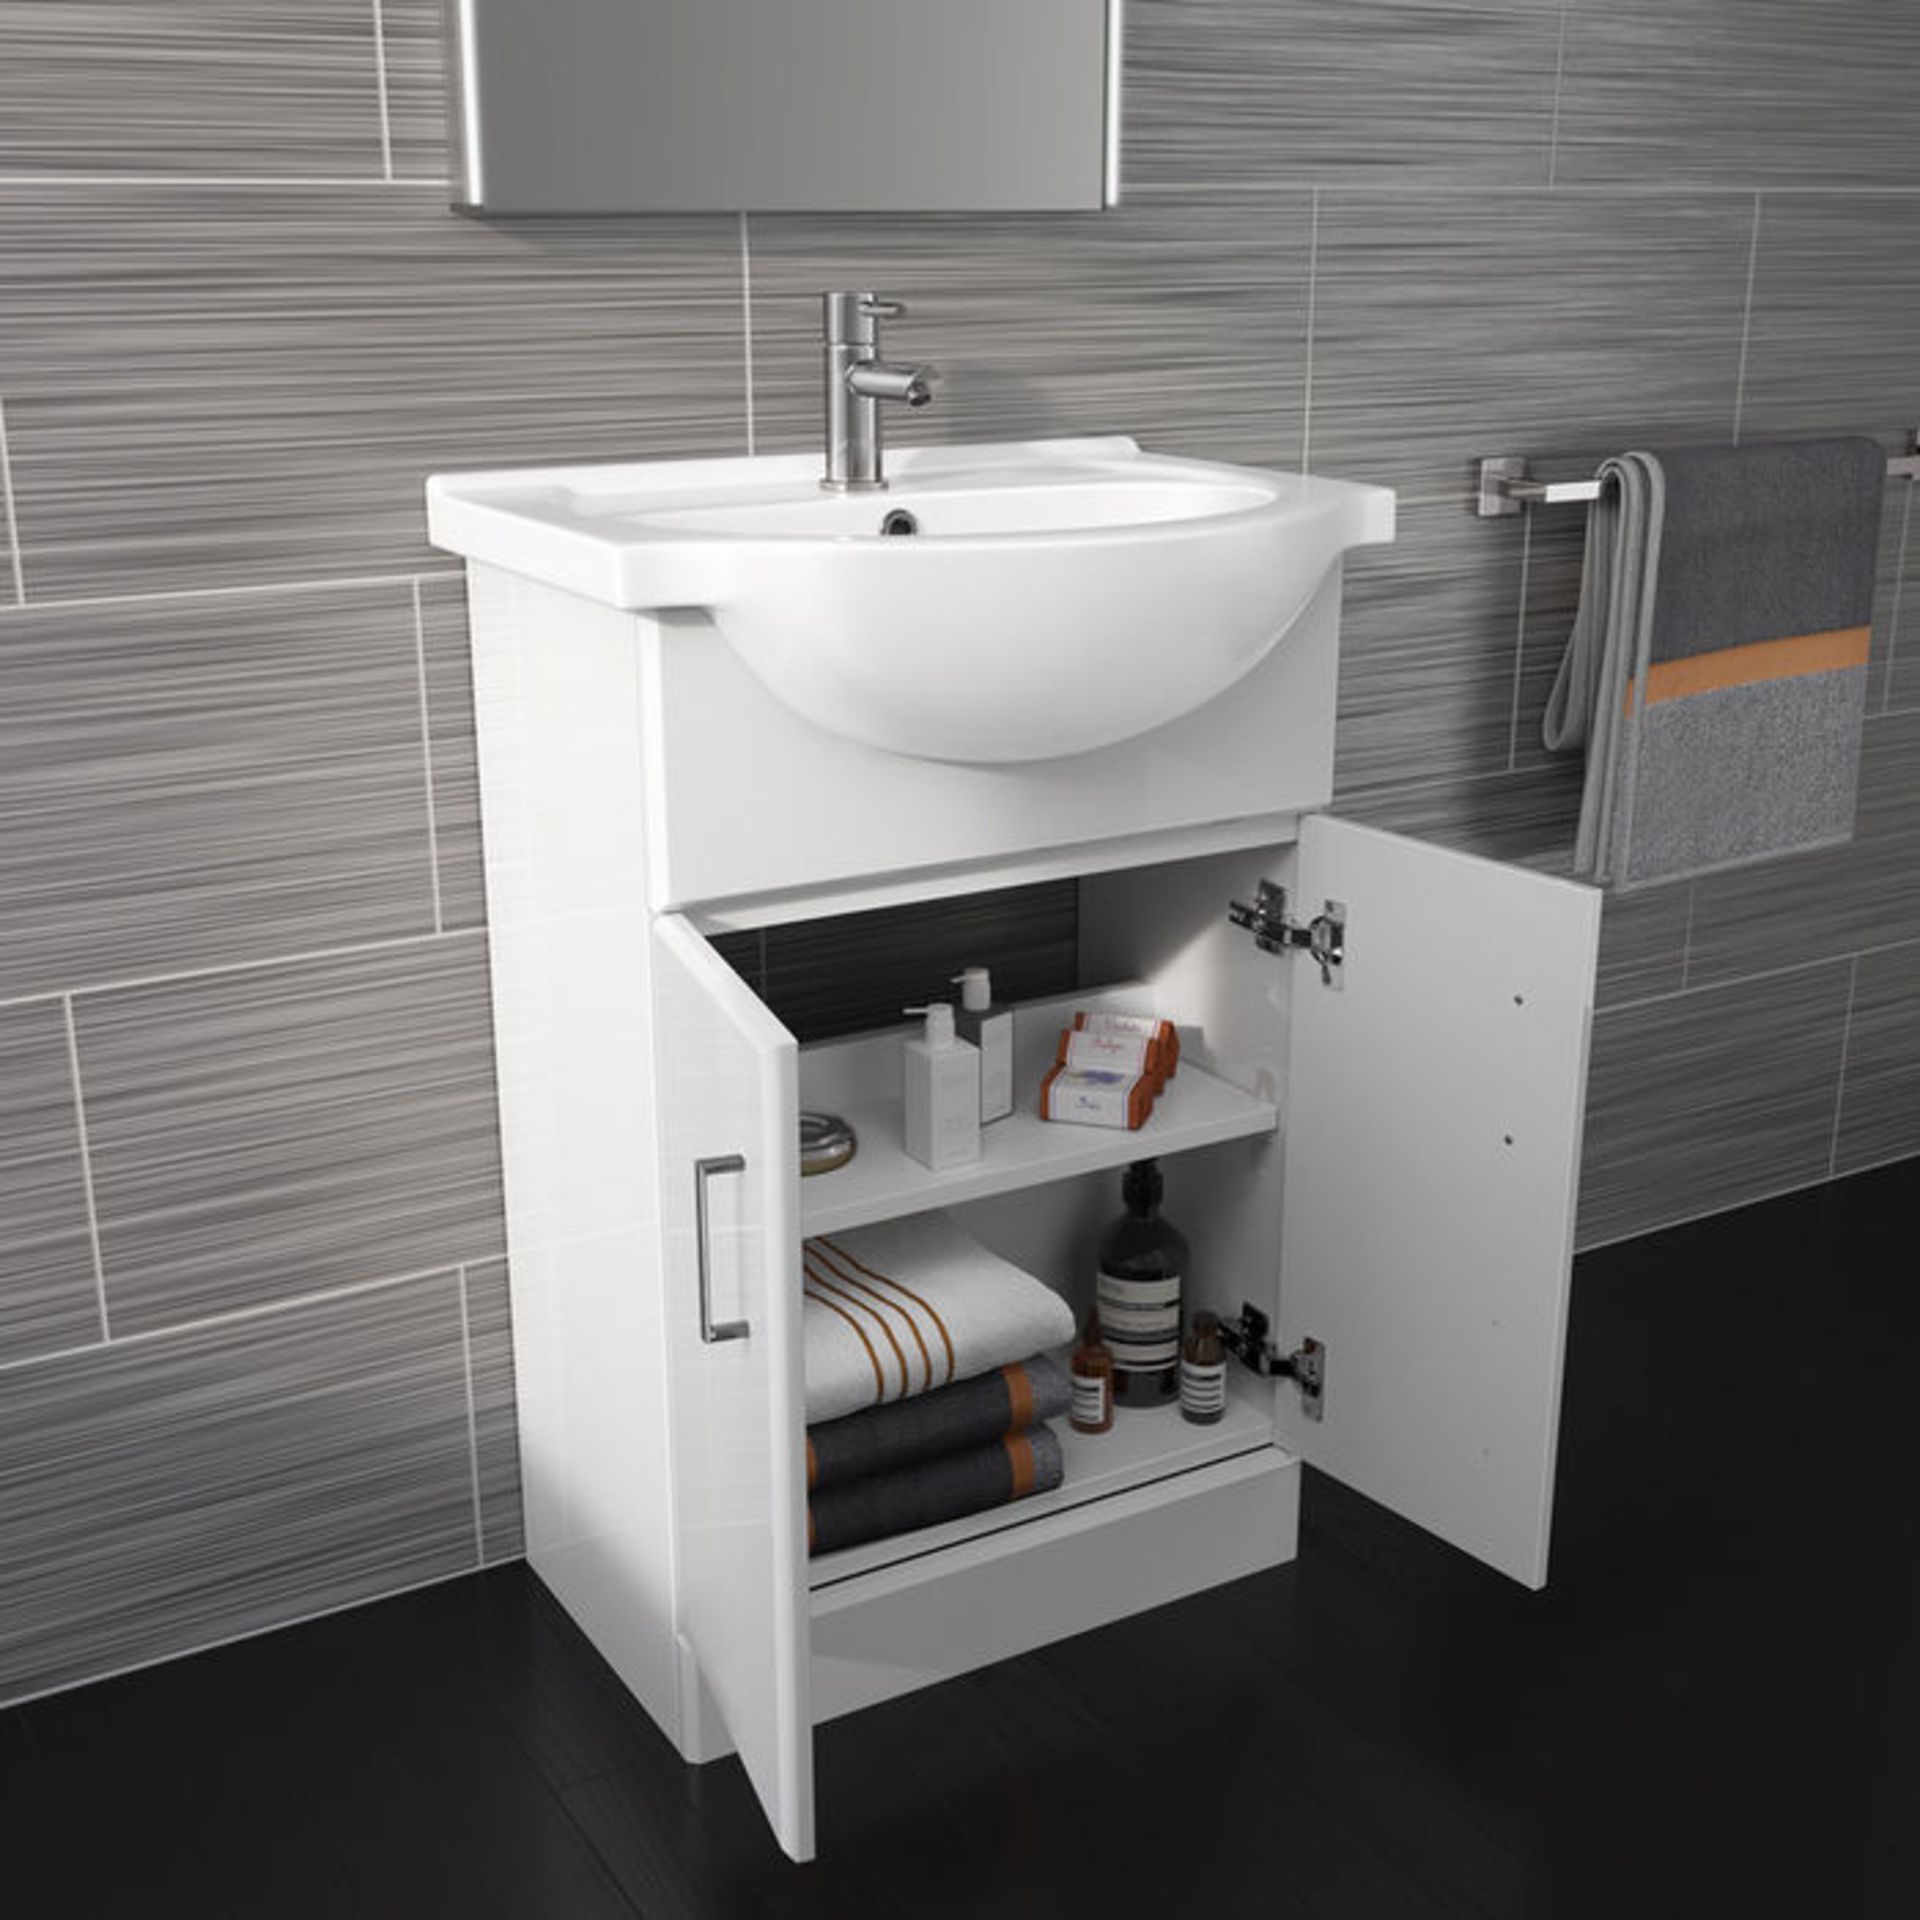 (TA201) 550x300mm Quartz Gloss White Built In Basin Cabinet. RRP £349.99. Comes complete with basin. - Image 2 of 5